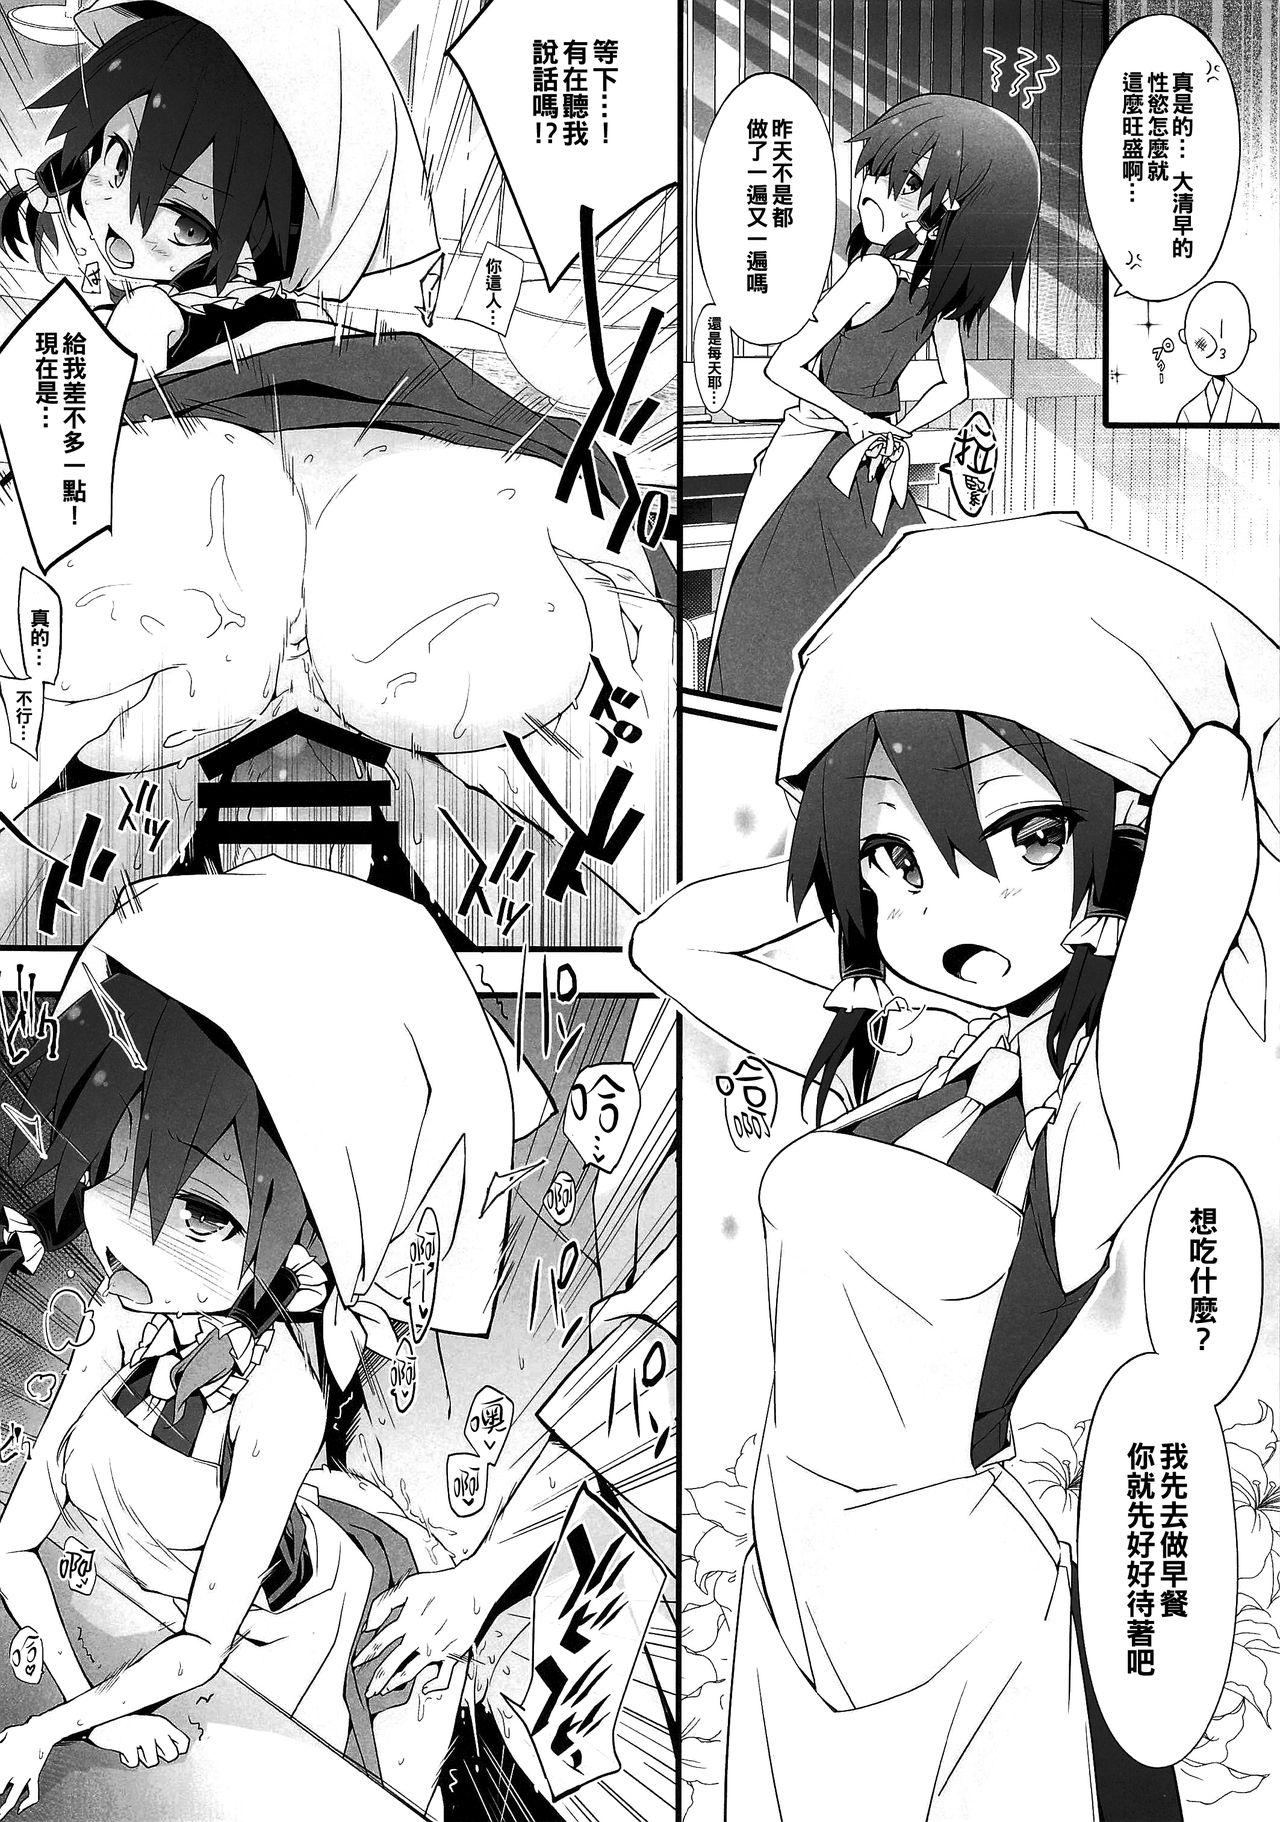 Wet Cunt Mainichi Reimu-san! - Touhou project All - Page 4